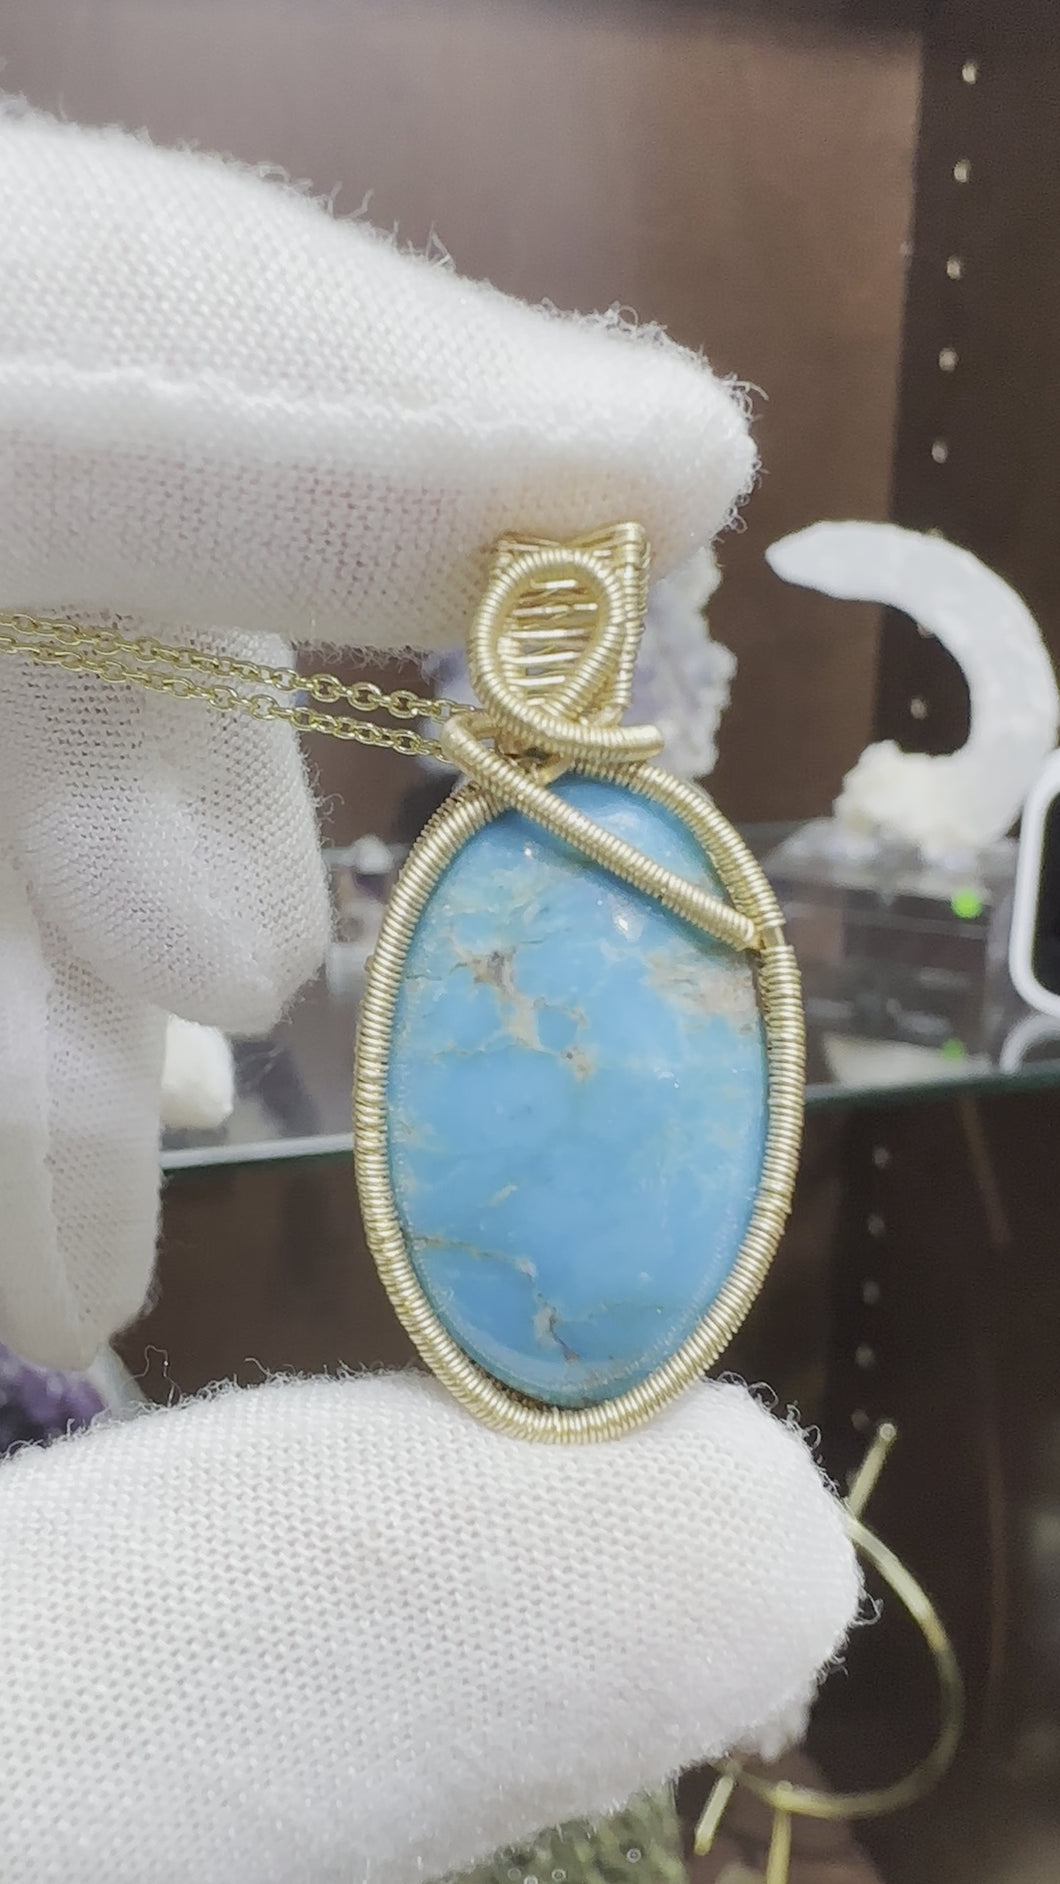 Sleeping Beauty Turquoise wrapped in 14/20 Gold Fill Wire